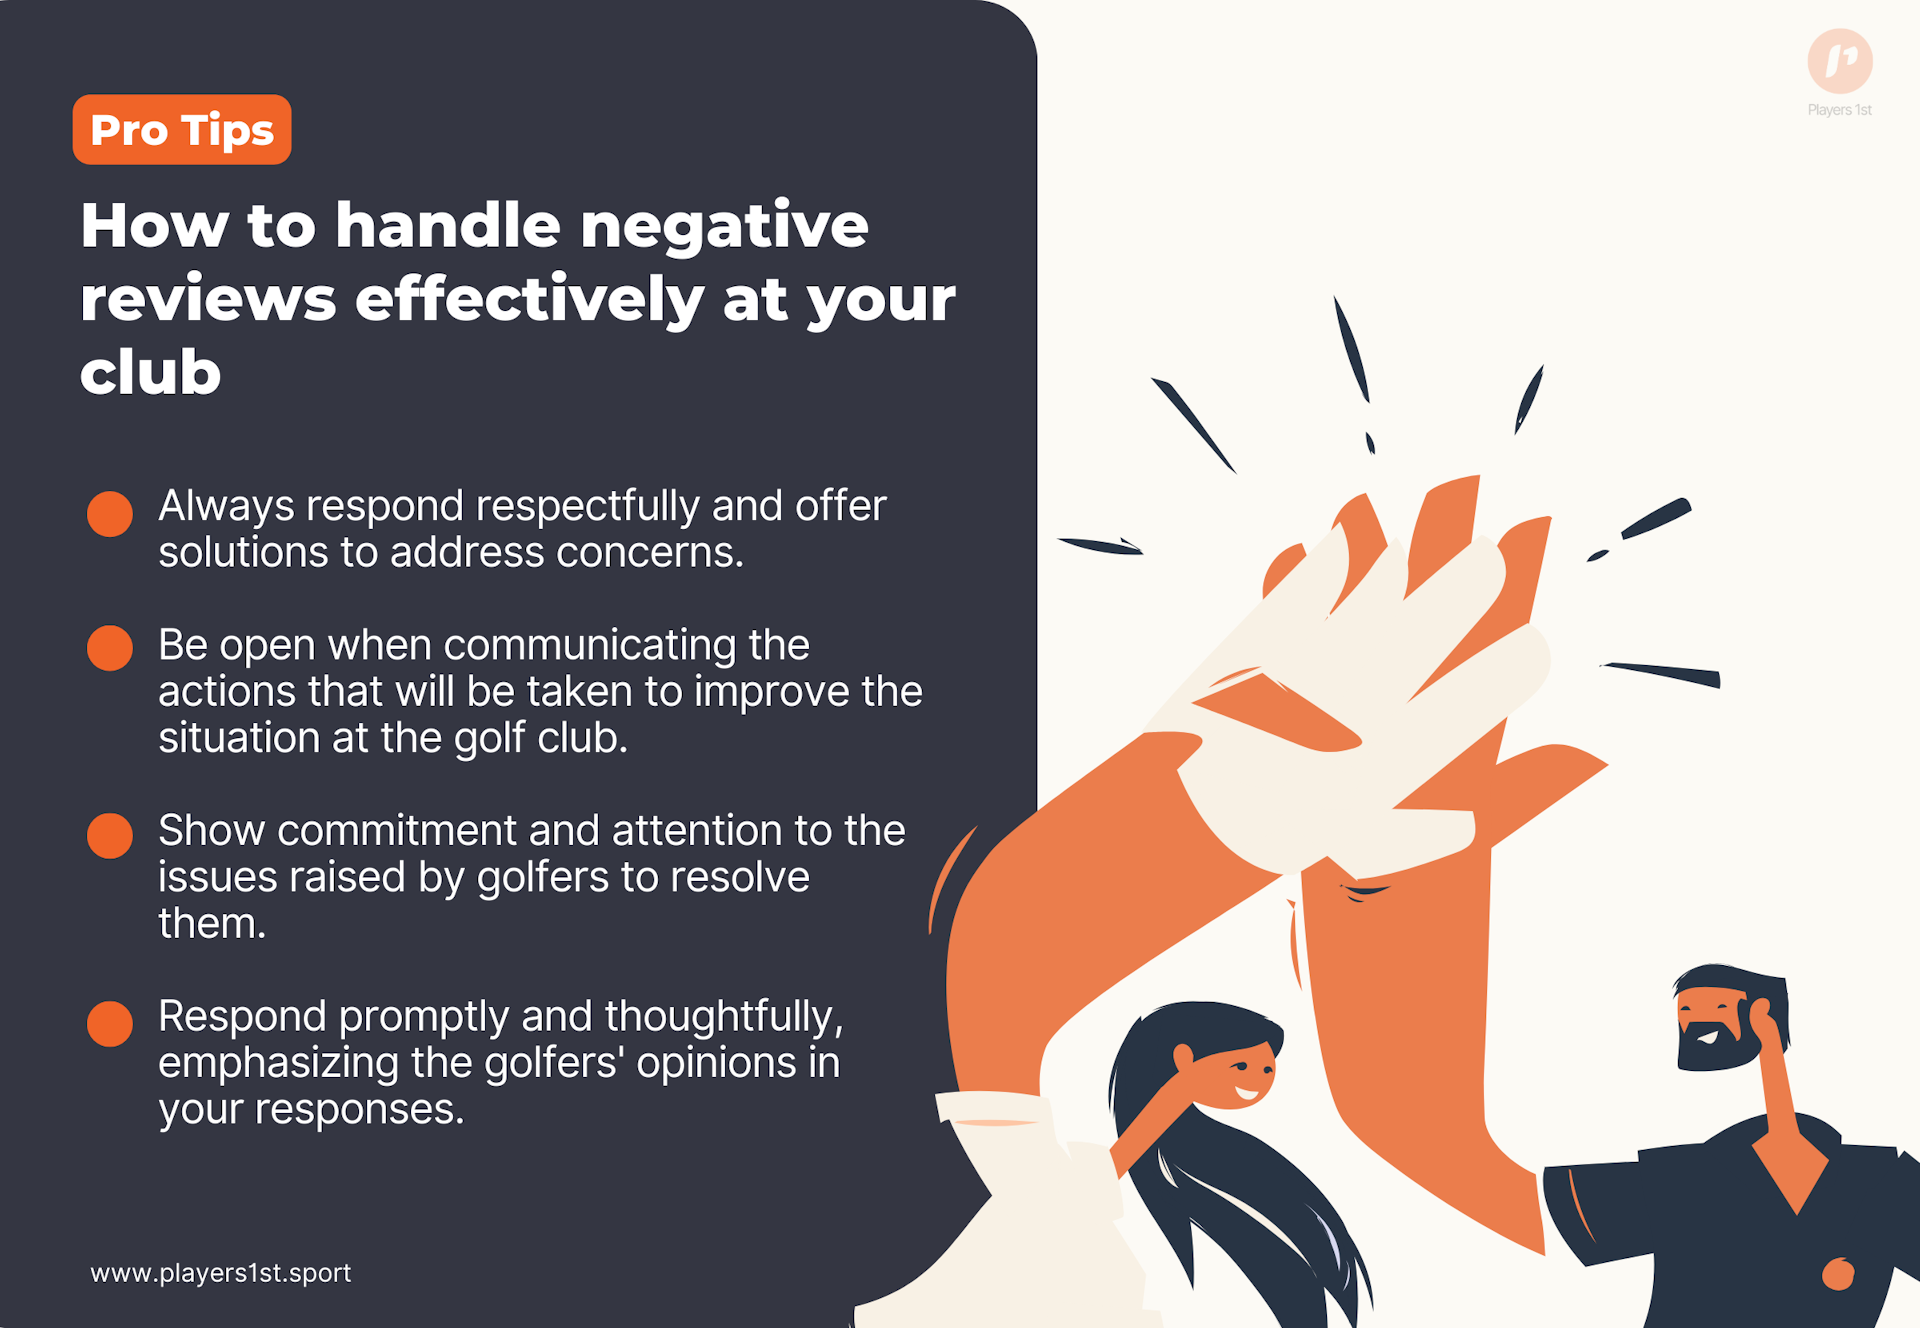 How to handle negative reviews effectively at your club